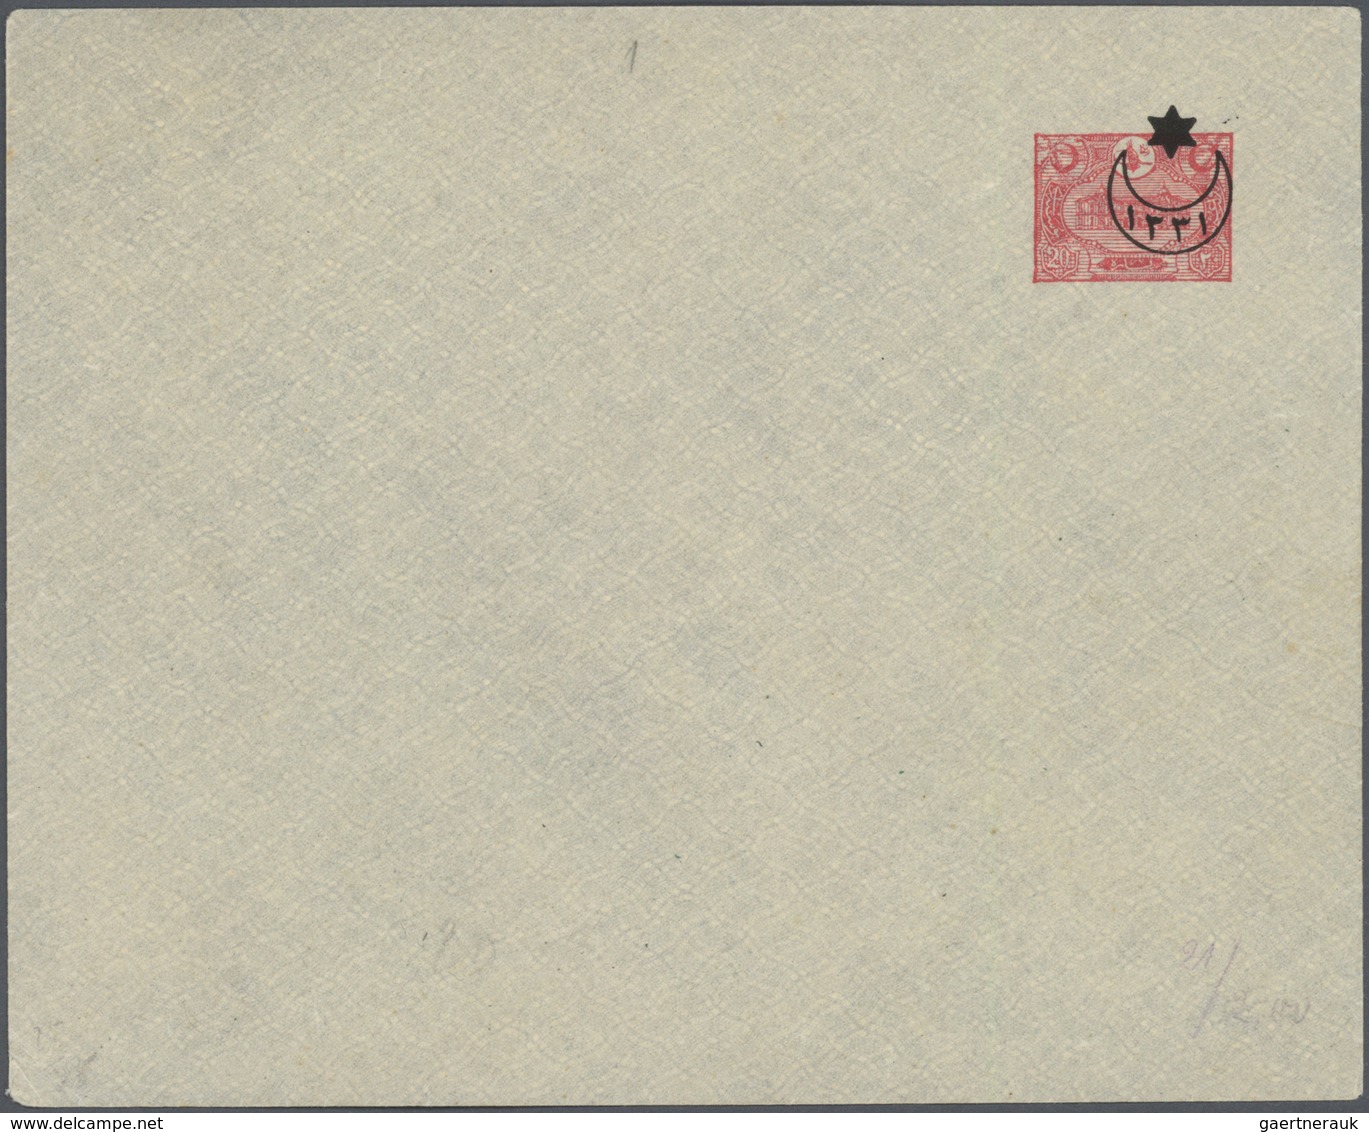 28367 Türkei: 1870-1960, 56 covers cards including railway cancellation Cons/Ple Moust.Pacha, cancellation